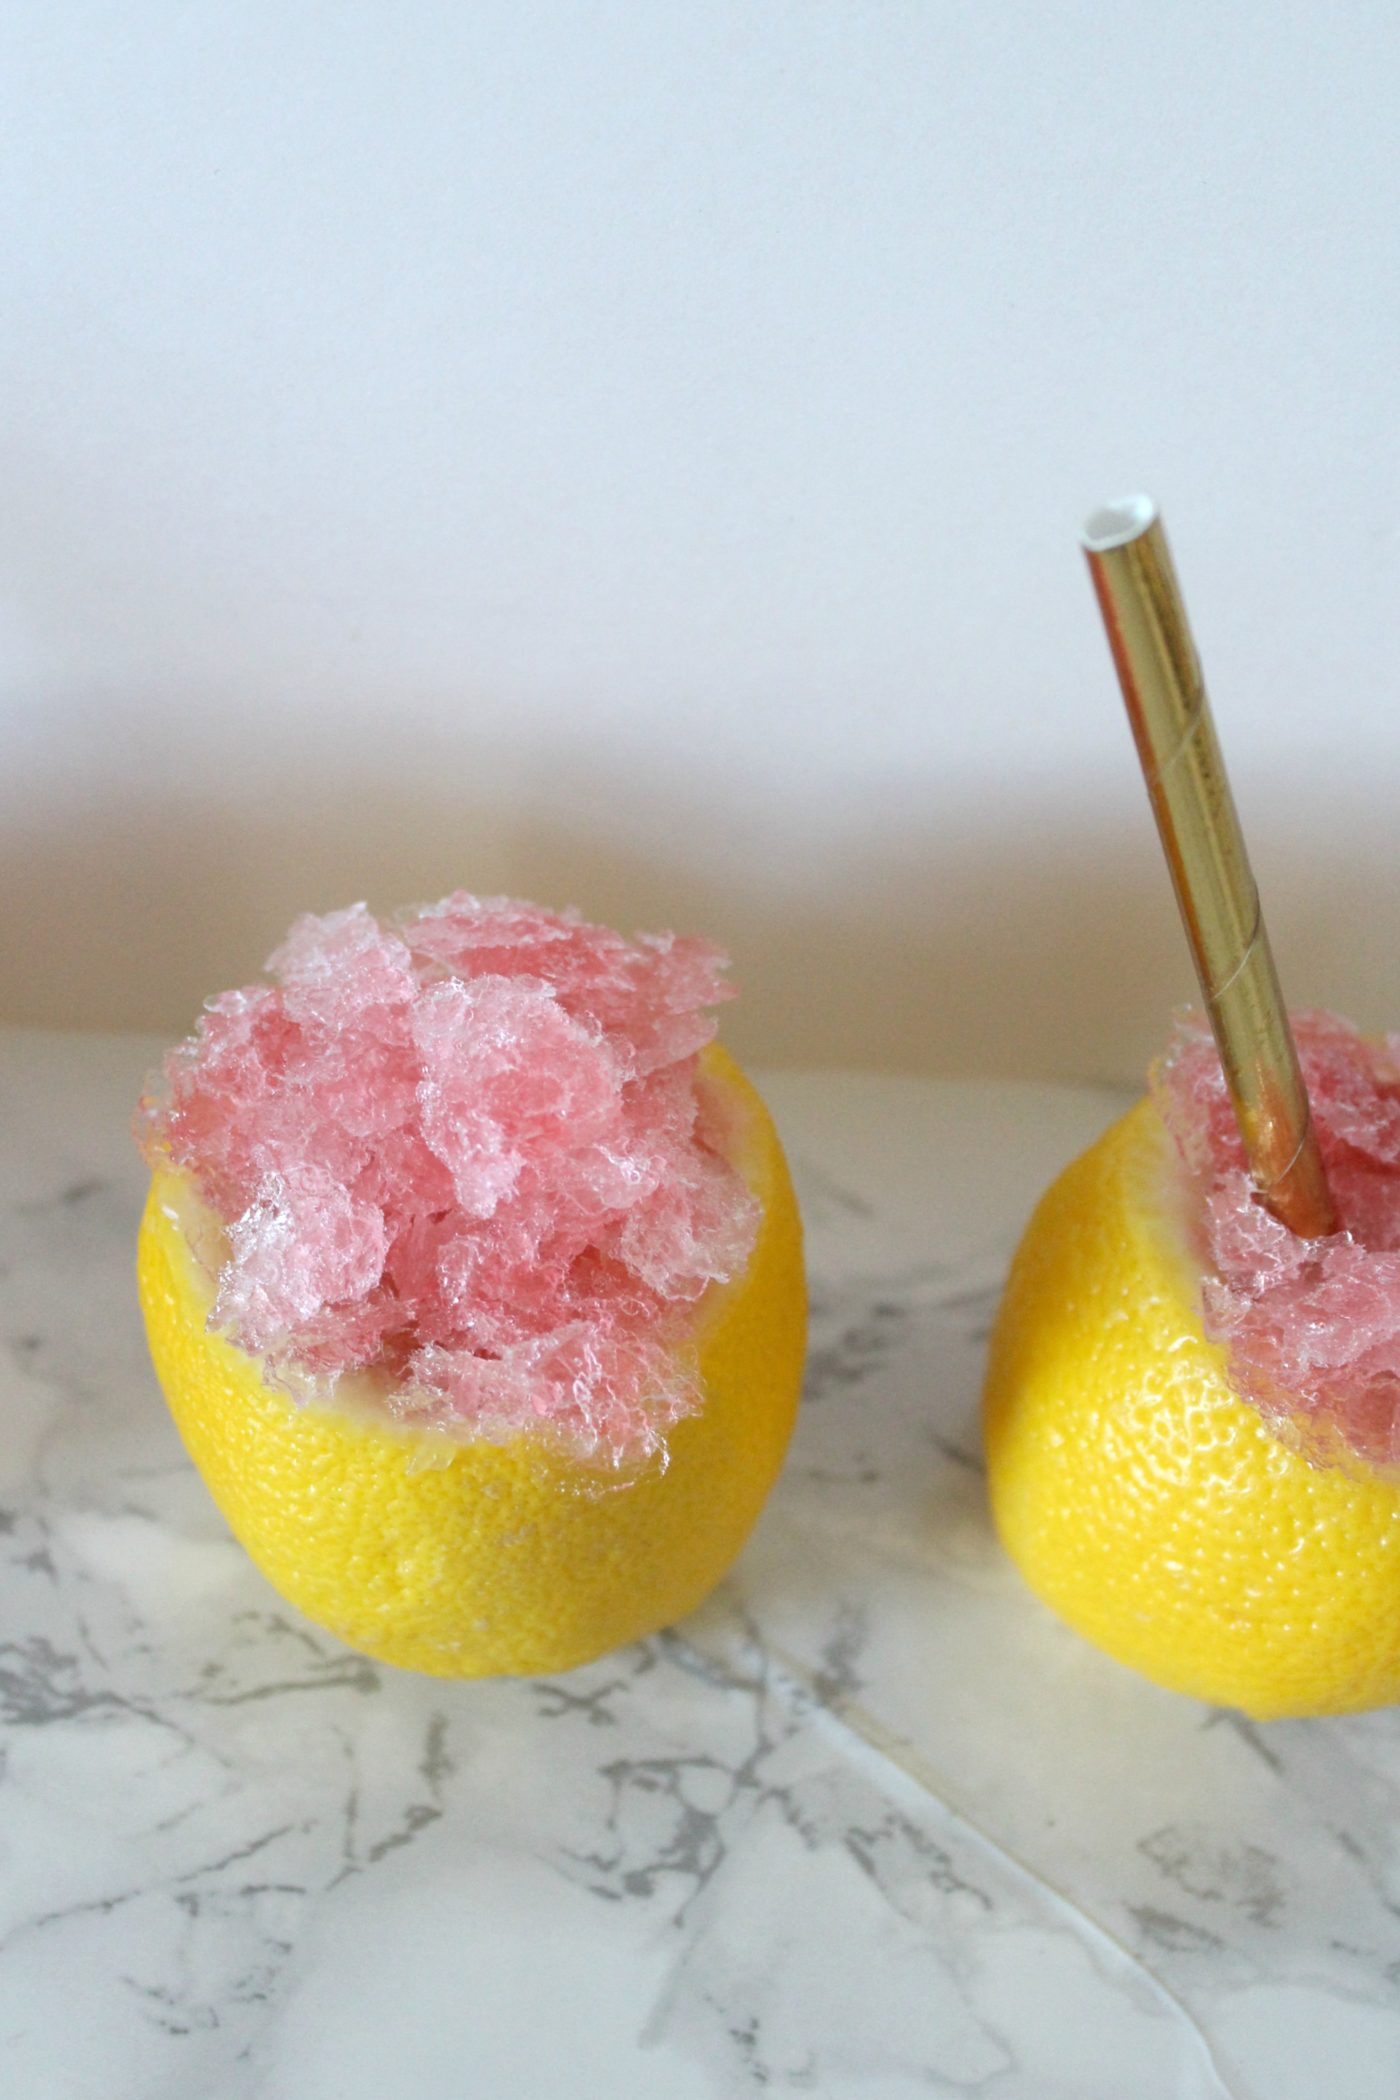 Granitas or slushies, whatever you want to call it, are one of the best treats to enjoy on a hot summer day. This one is really easy to replicate.